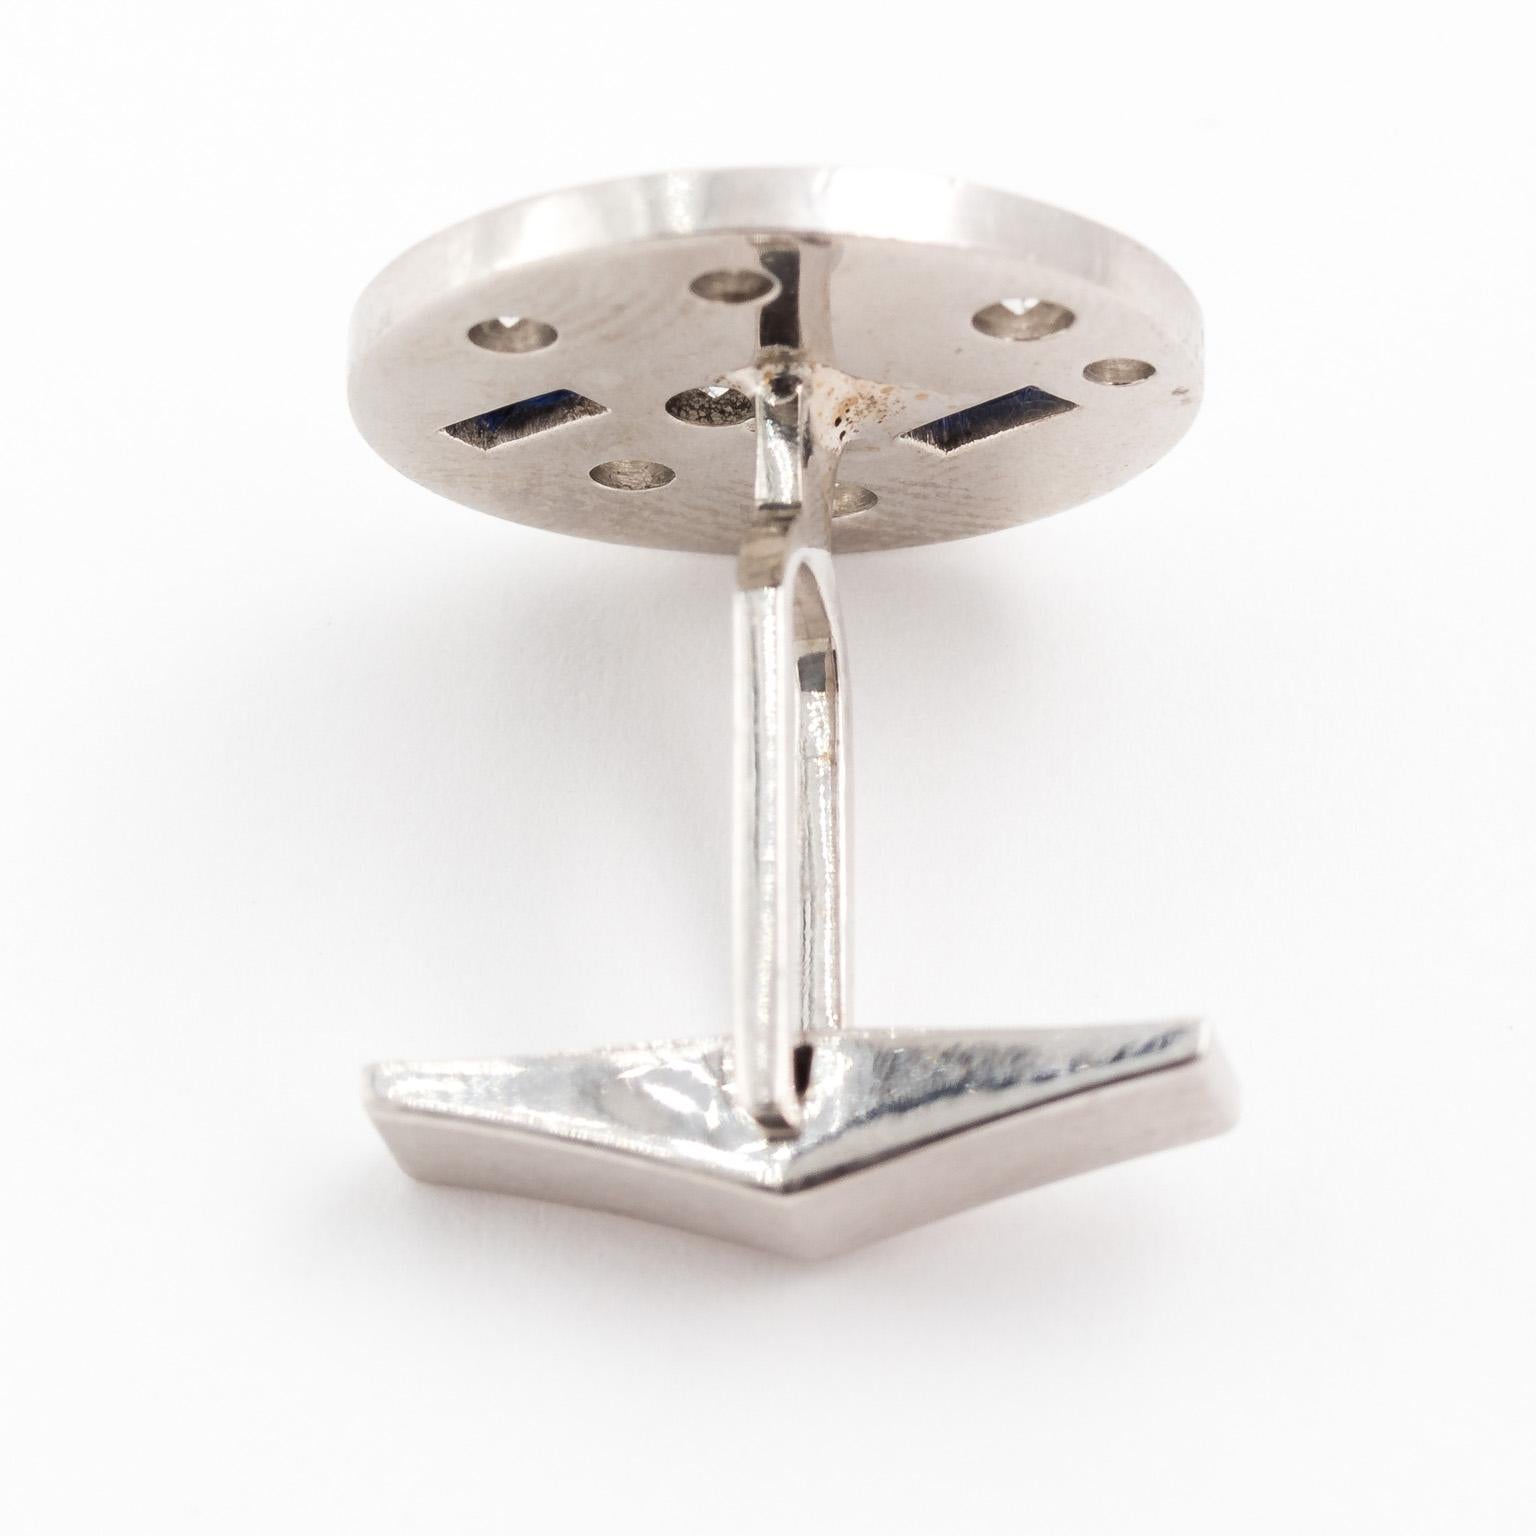 14 Karat White Gold Cufflinks In Good Condition For Sale In St.amford, CT